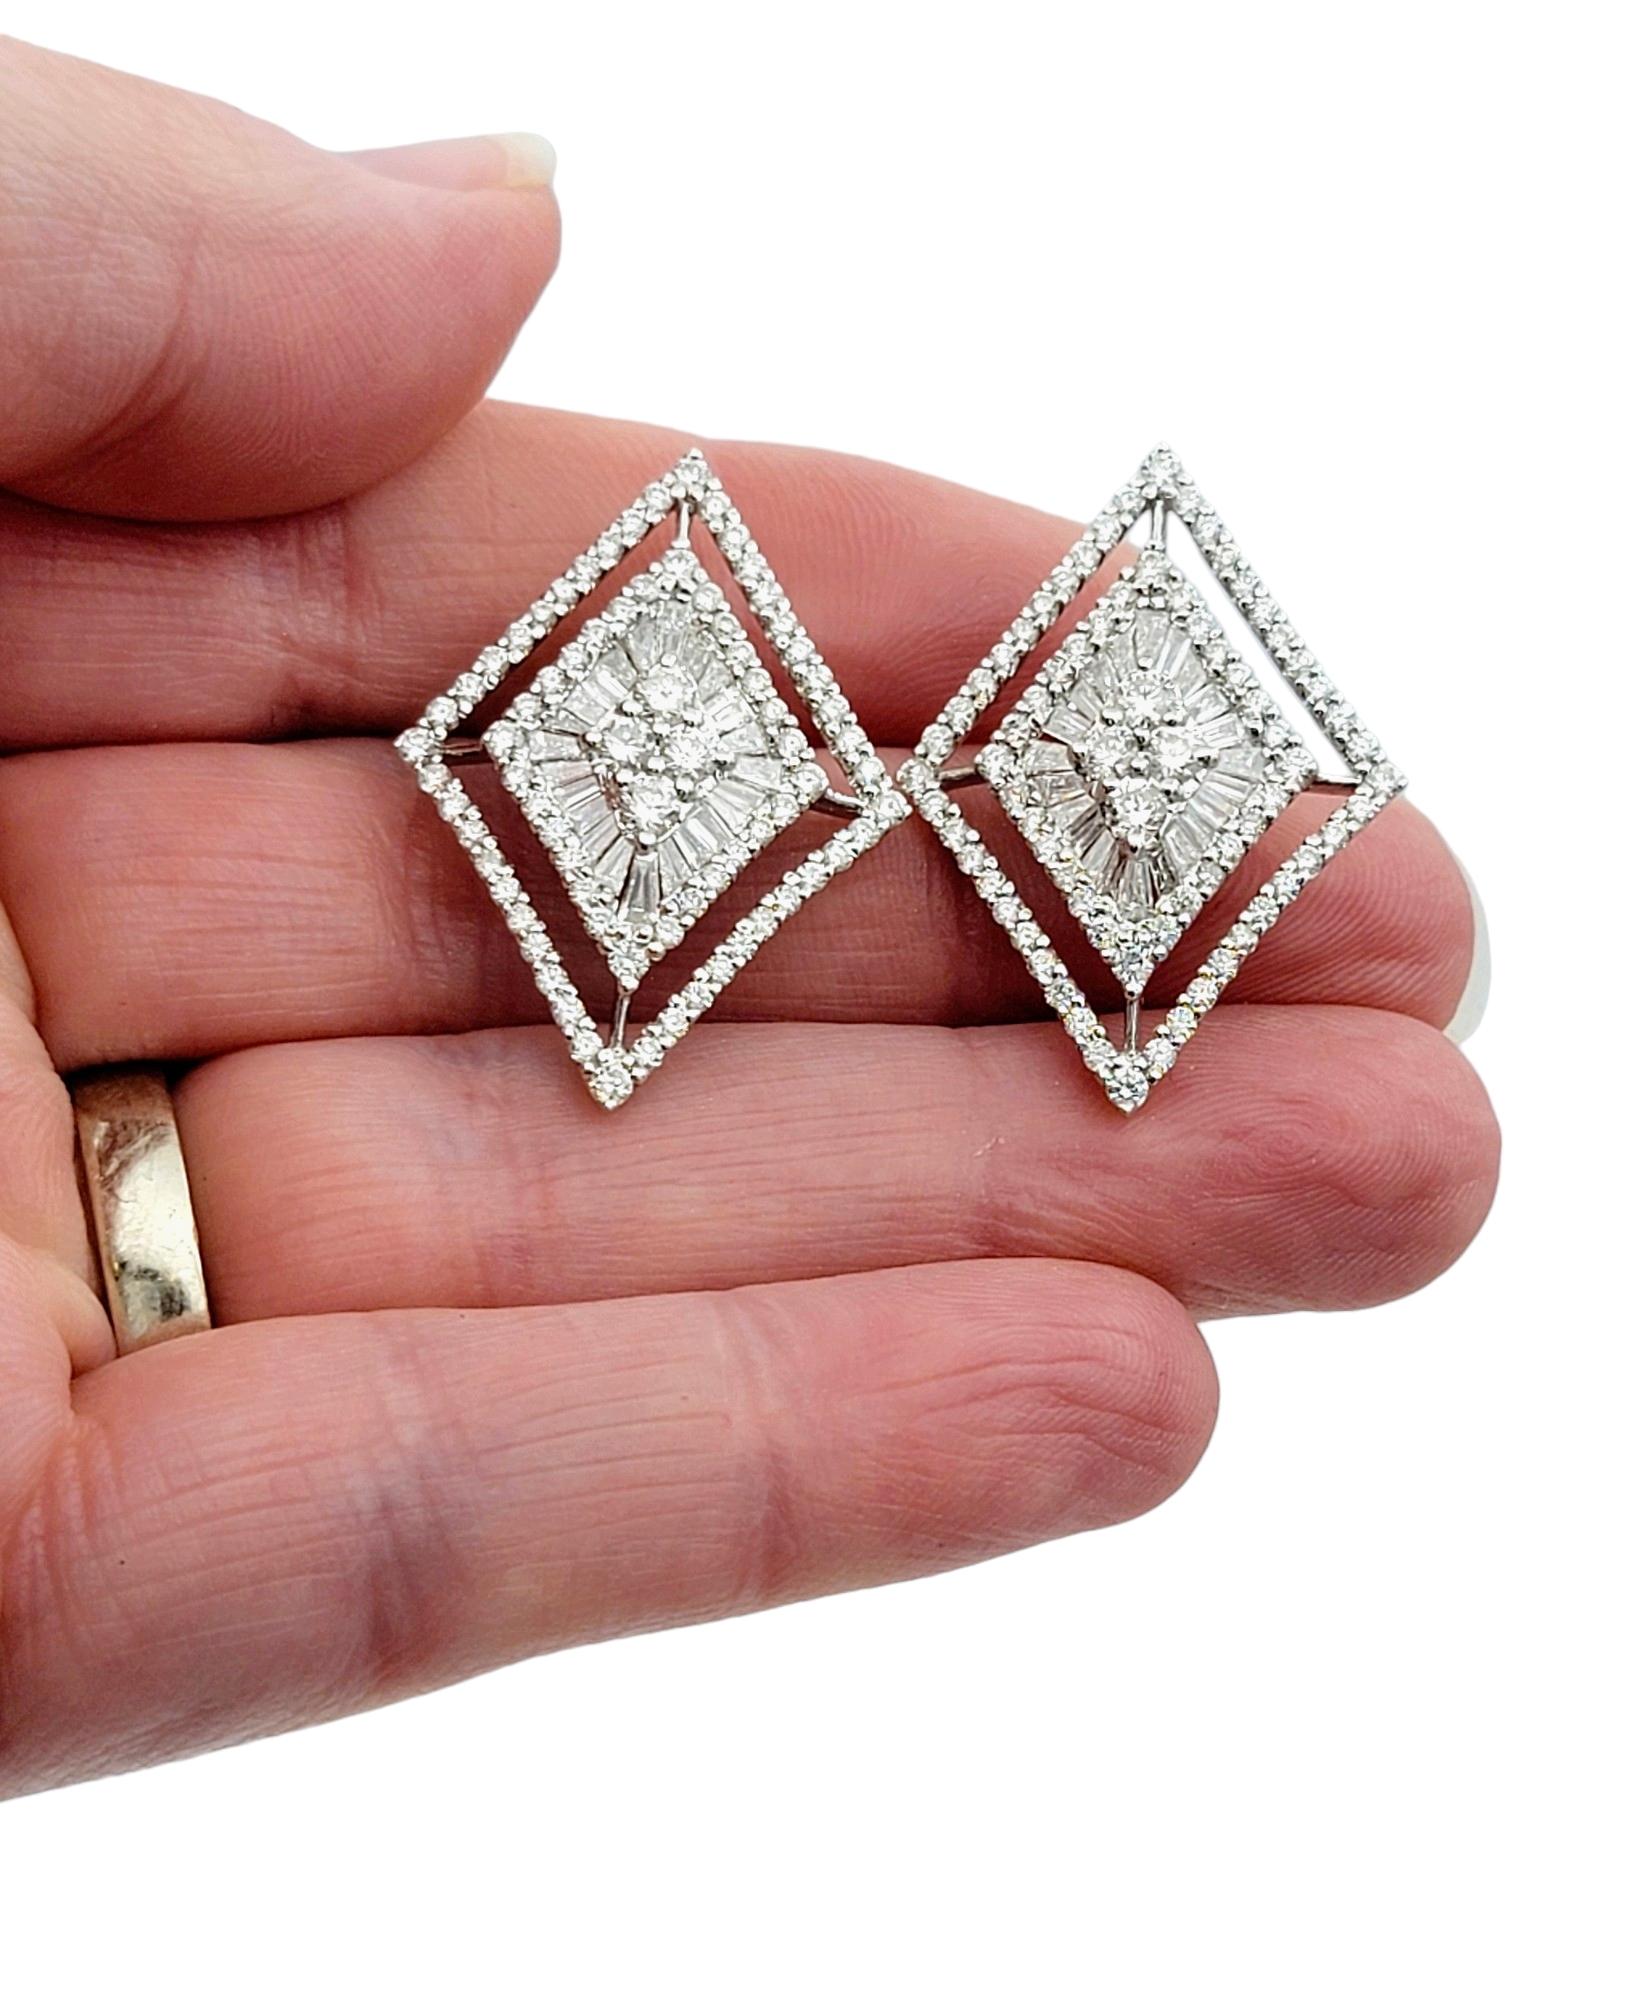 Round and Baguette Diamond Geometric Stud Earrings Set in 18 Karat White Gold For Sale 3